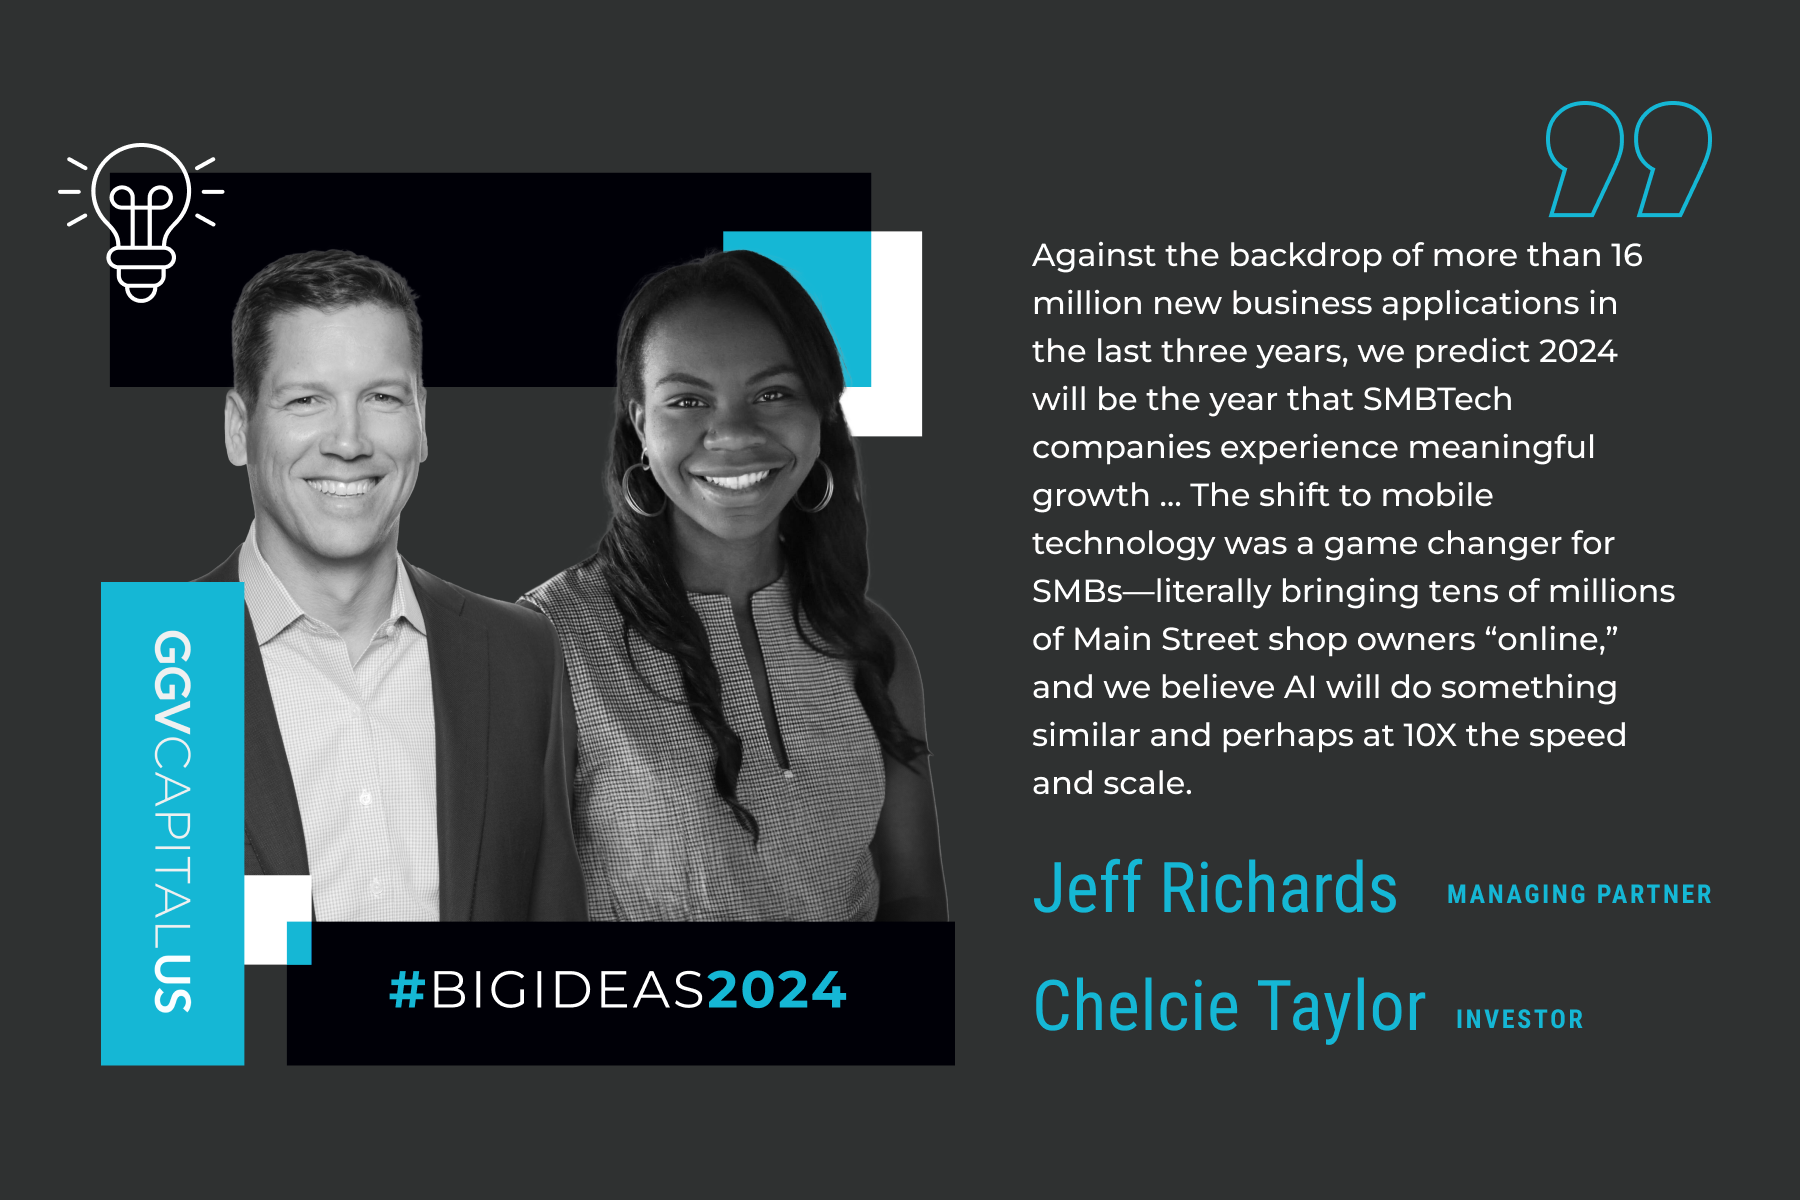 SMBTech 2024 predictions by Jeff Richards and Chelcie Taylor